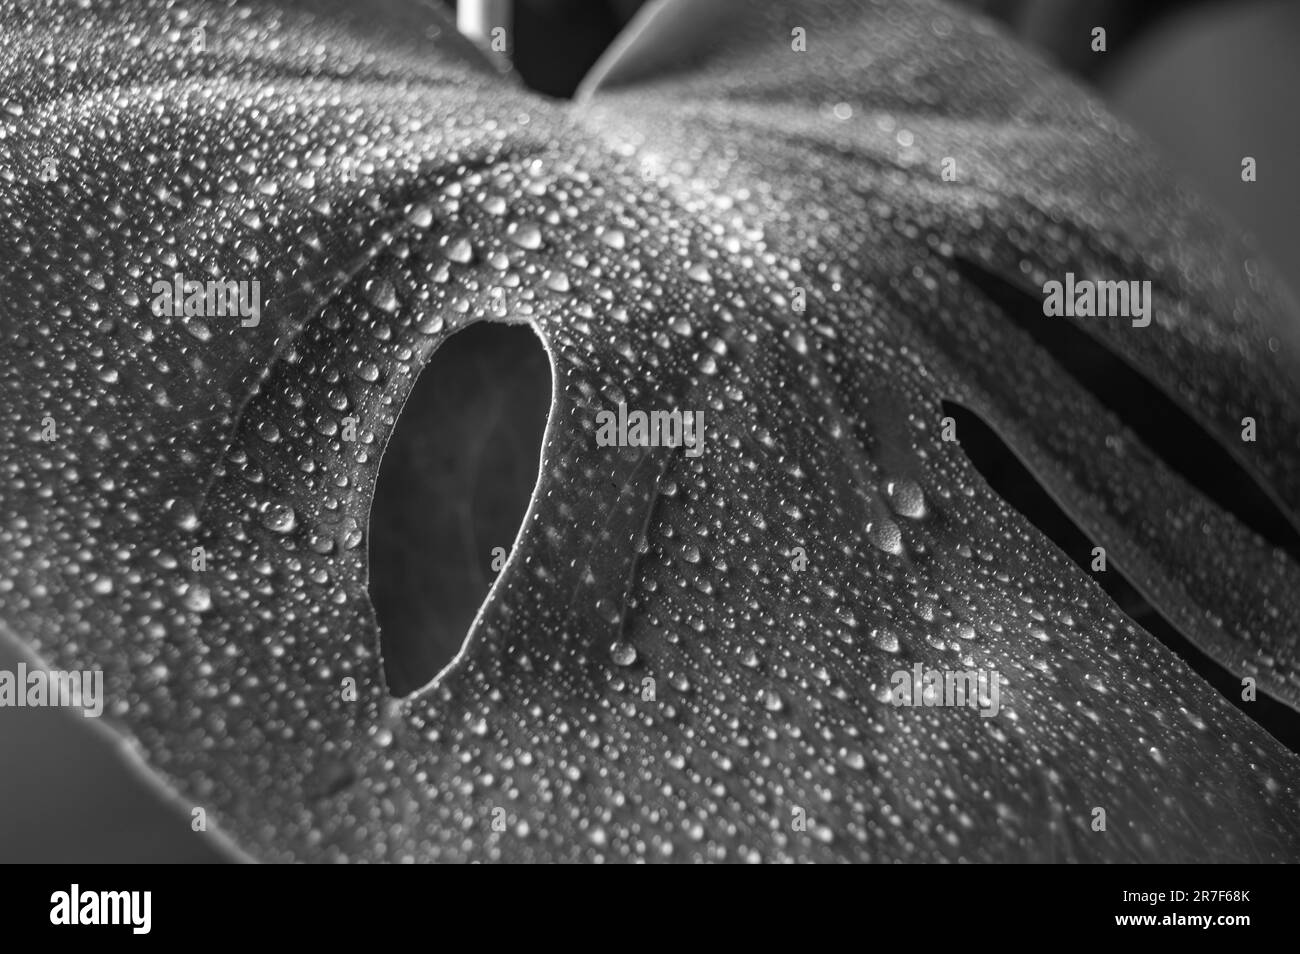 Monstera Deliciosa leaf close up black and white houseplant photography Stock Photo